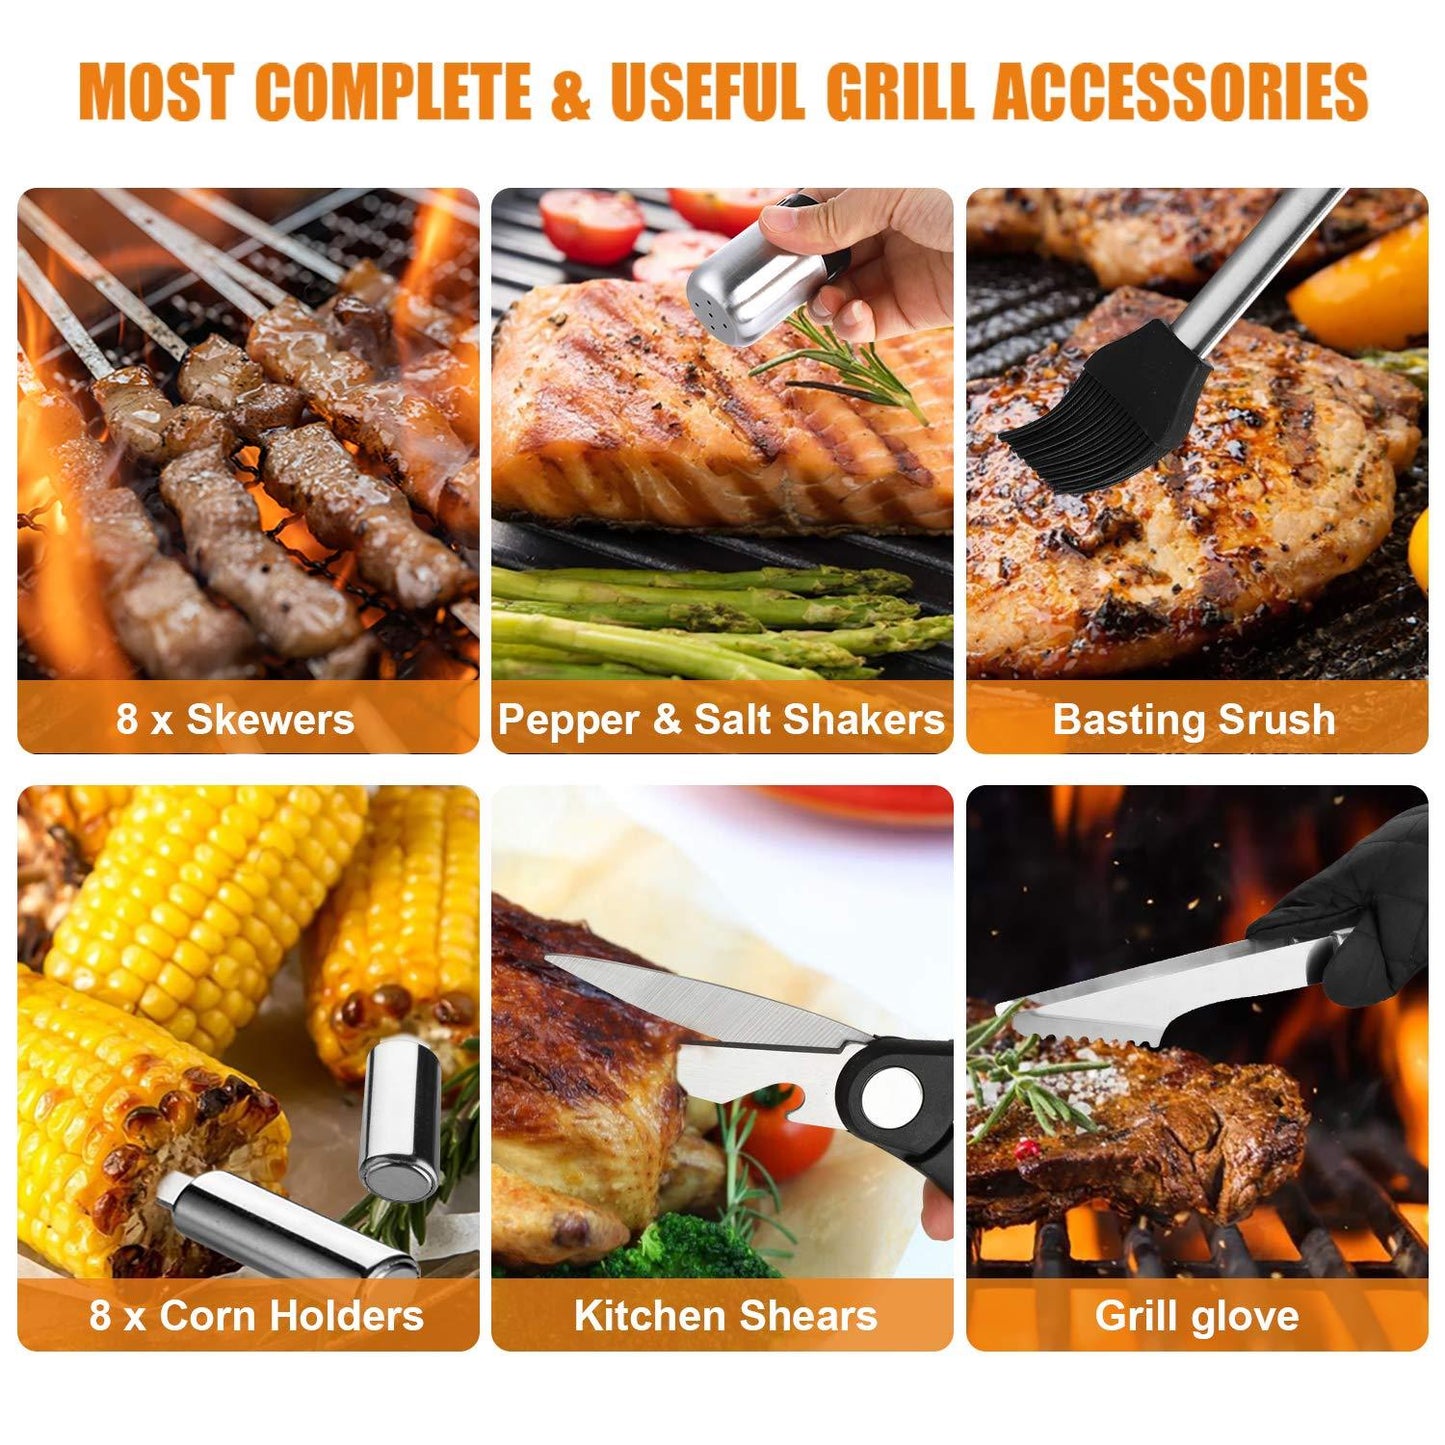 Cifaisi BBQ Grill Utensils Set for Camping/Backyard, 38Pcs Stainless Steel Grill Tools Grilling Accessories with Barbecue Mats, Aluminum Case, Thermometer for Men Women - CookCave